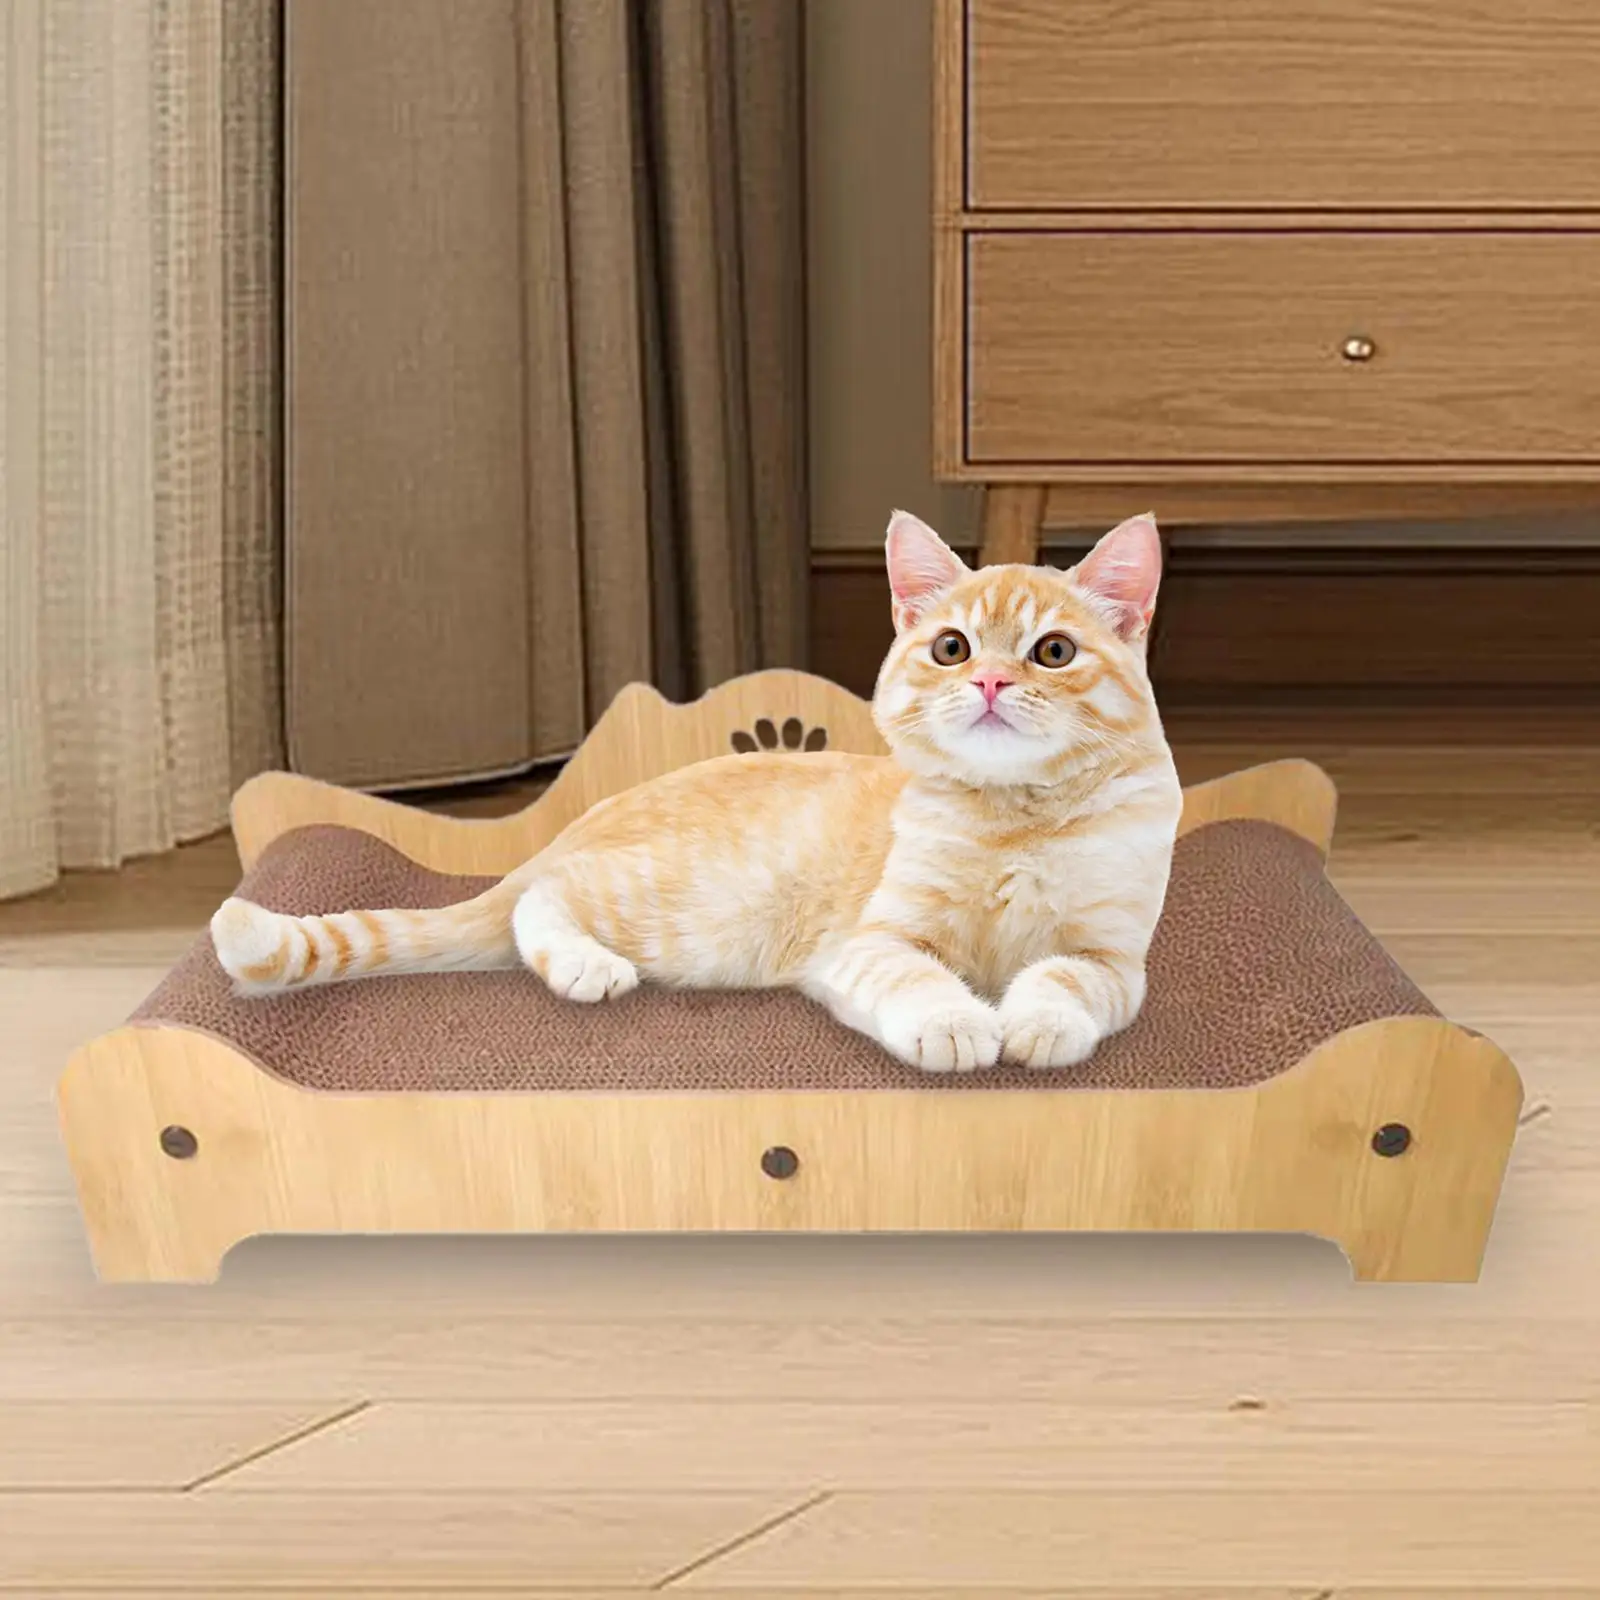 Cat Scratching Board Non Slip Furniture Protector Decorative Sleeping Bed Corrugated Cat Lounge Chair for Kitten Indoor Kitty